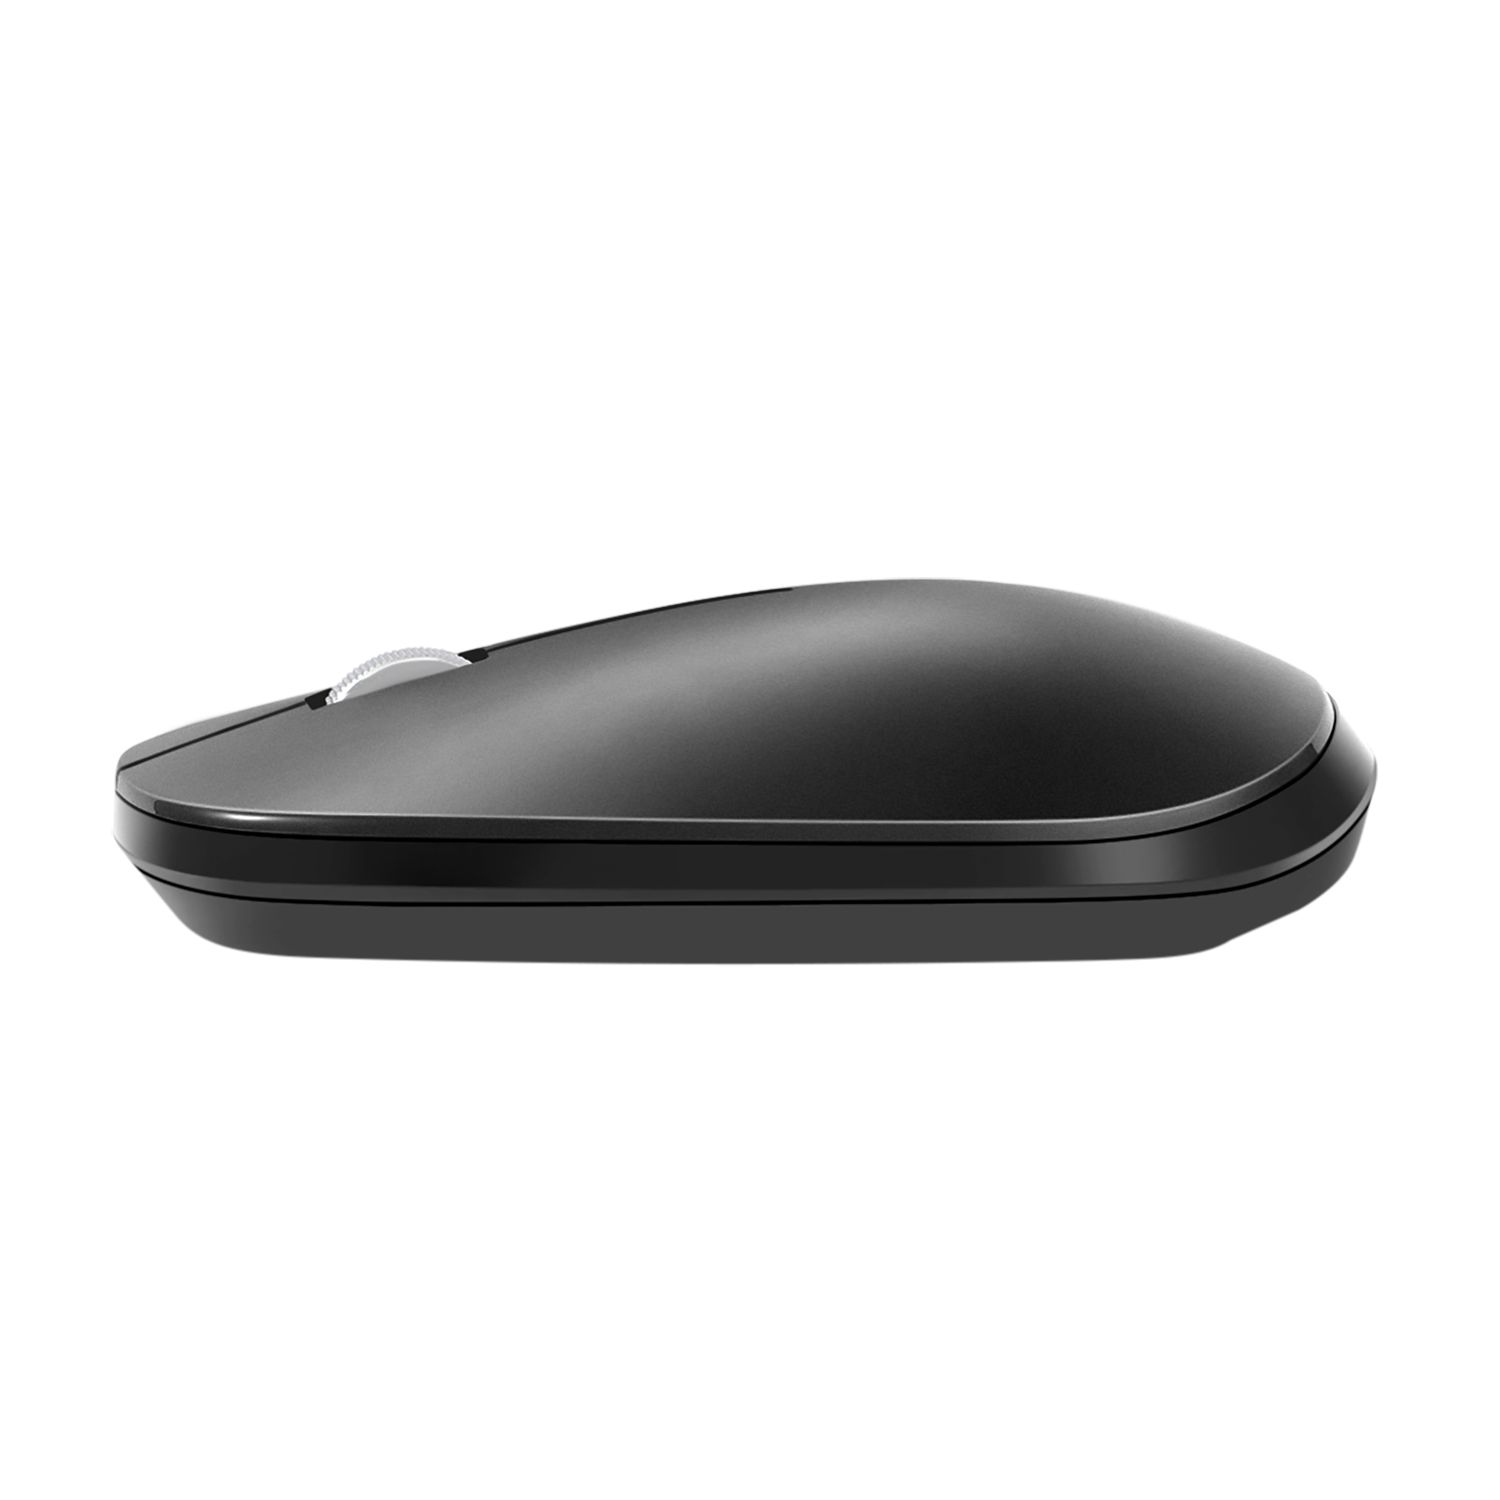 BUBM-WXSB-E-Wireless-Mouse-24GHz-Gaming-Optical-Mice-Office-Mouse-with-USB-Receiver-for-Laptop-PC-Co-1622093